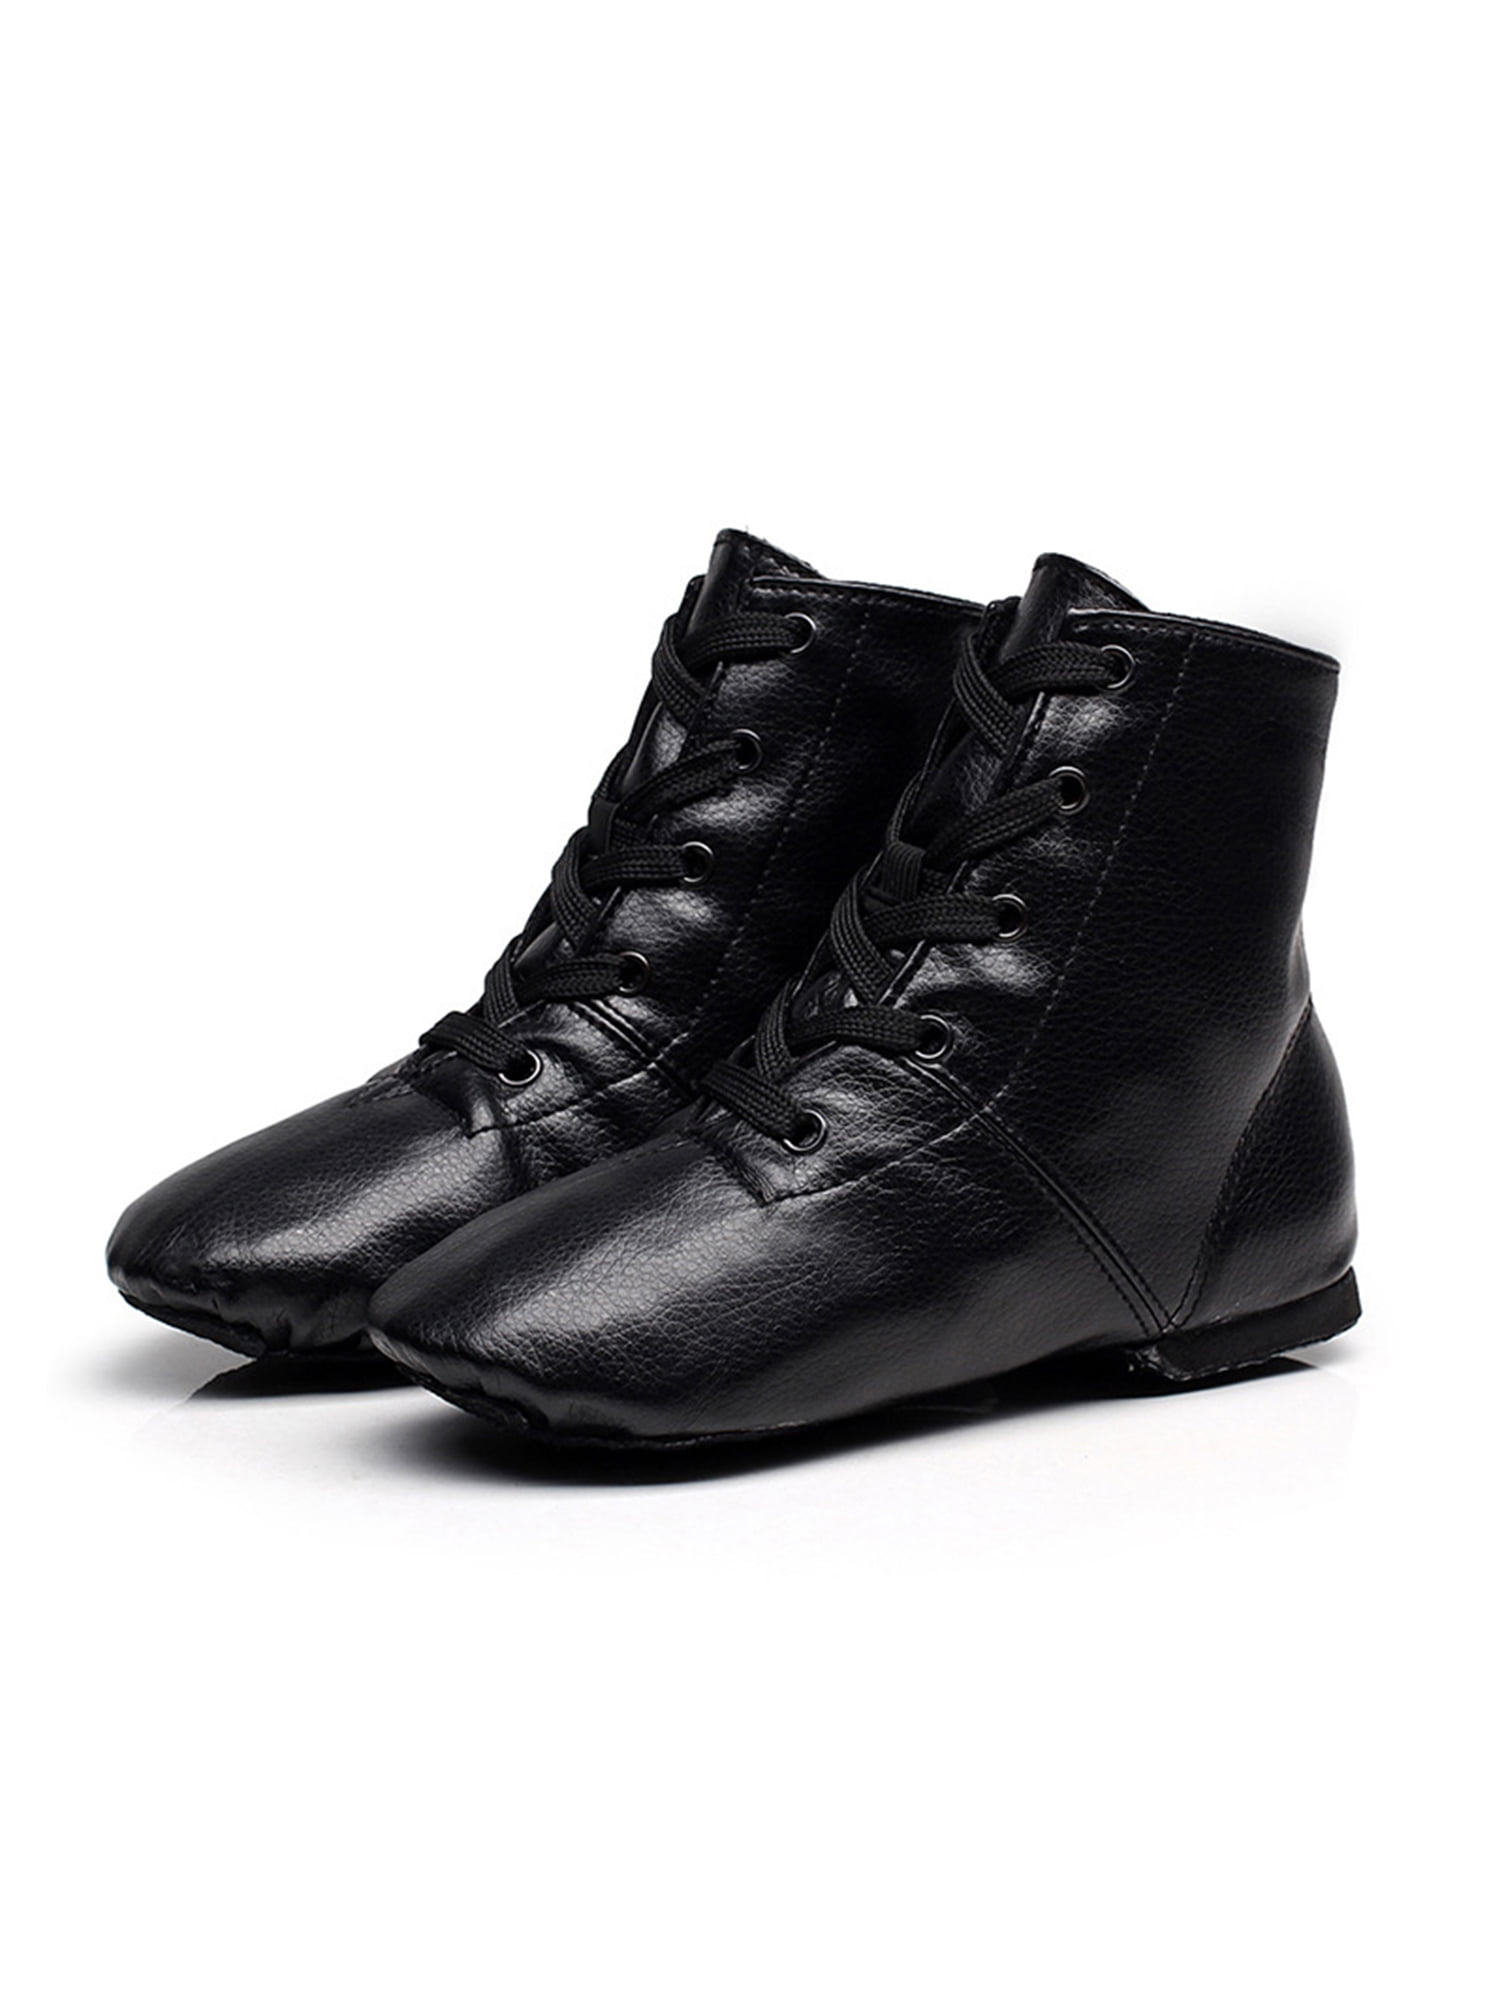 All-leather Jazz Boots Dancing Shoes Modern Dance Boots Practice Shoes Unisex 